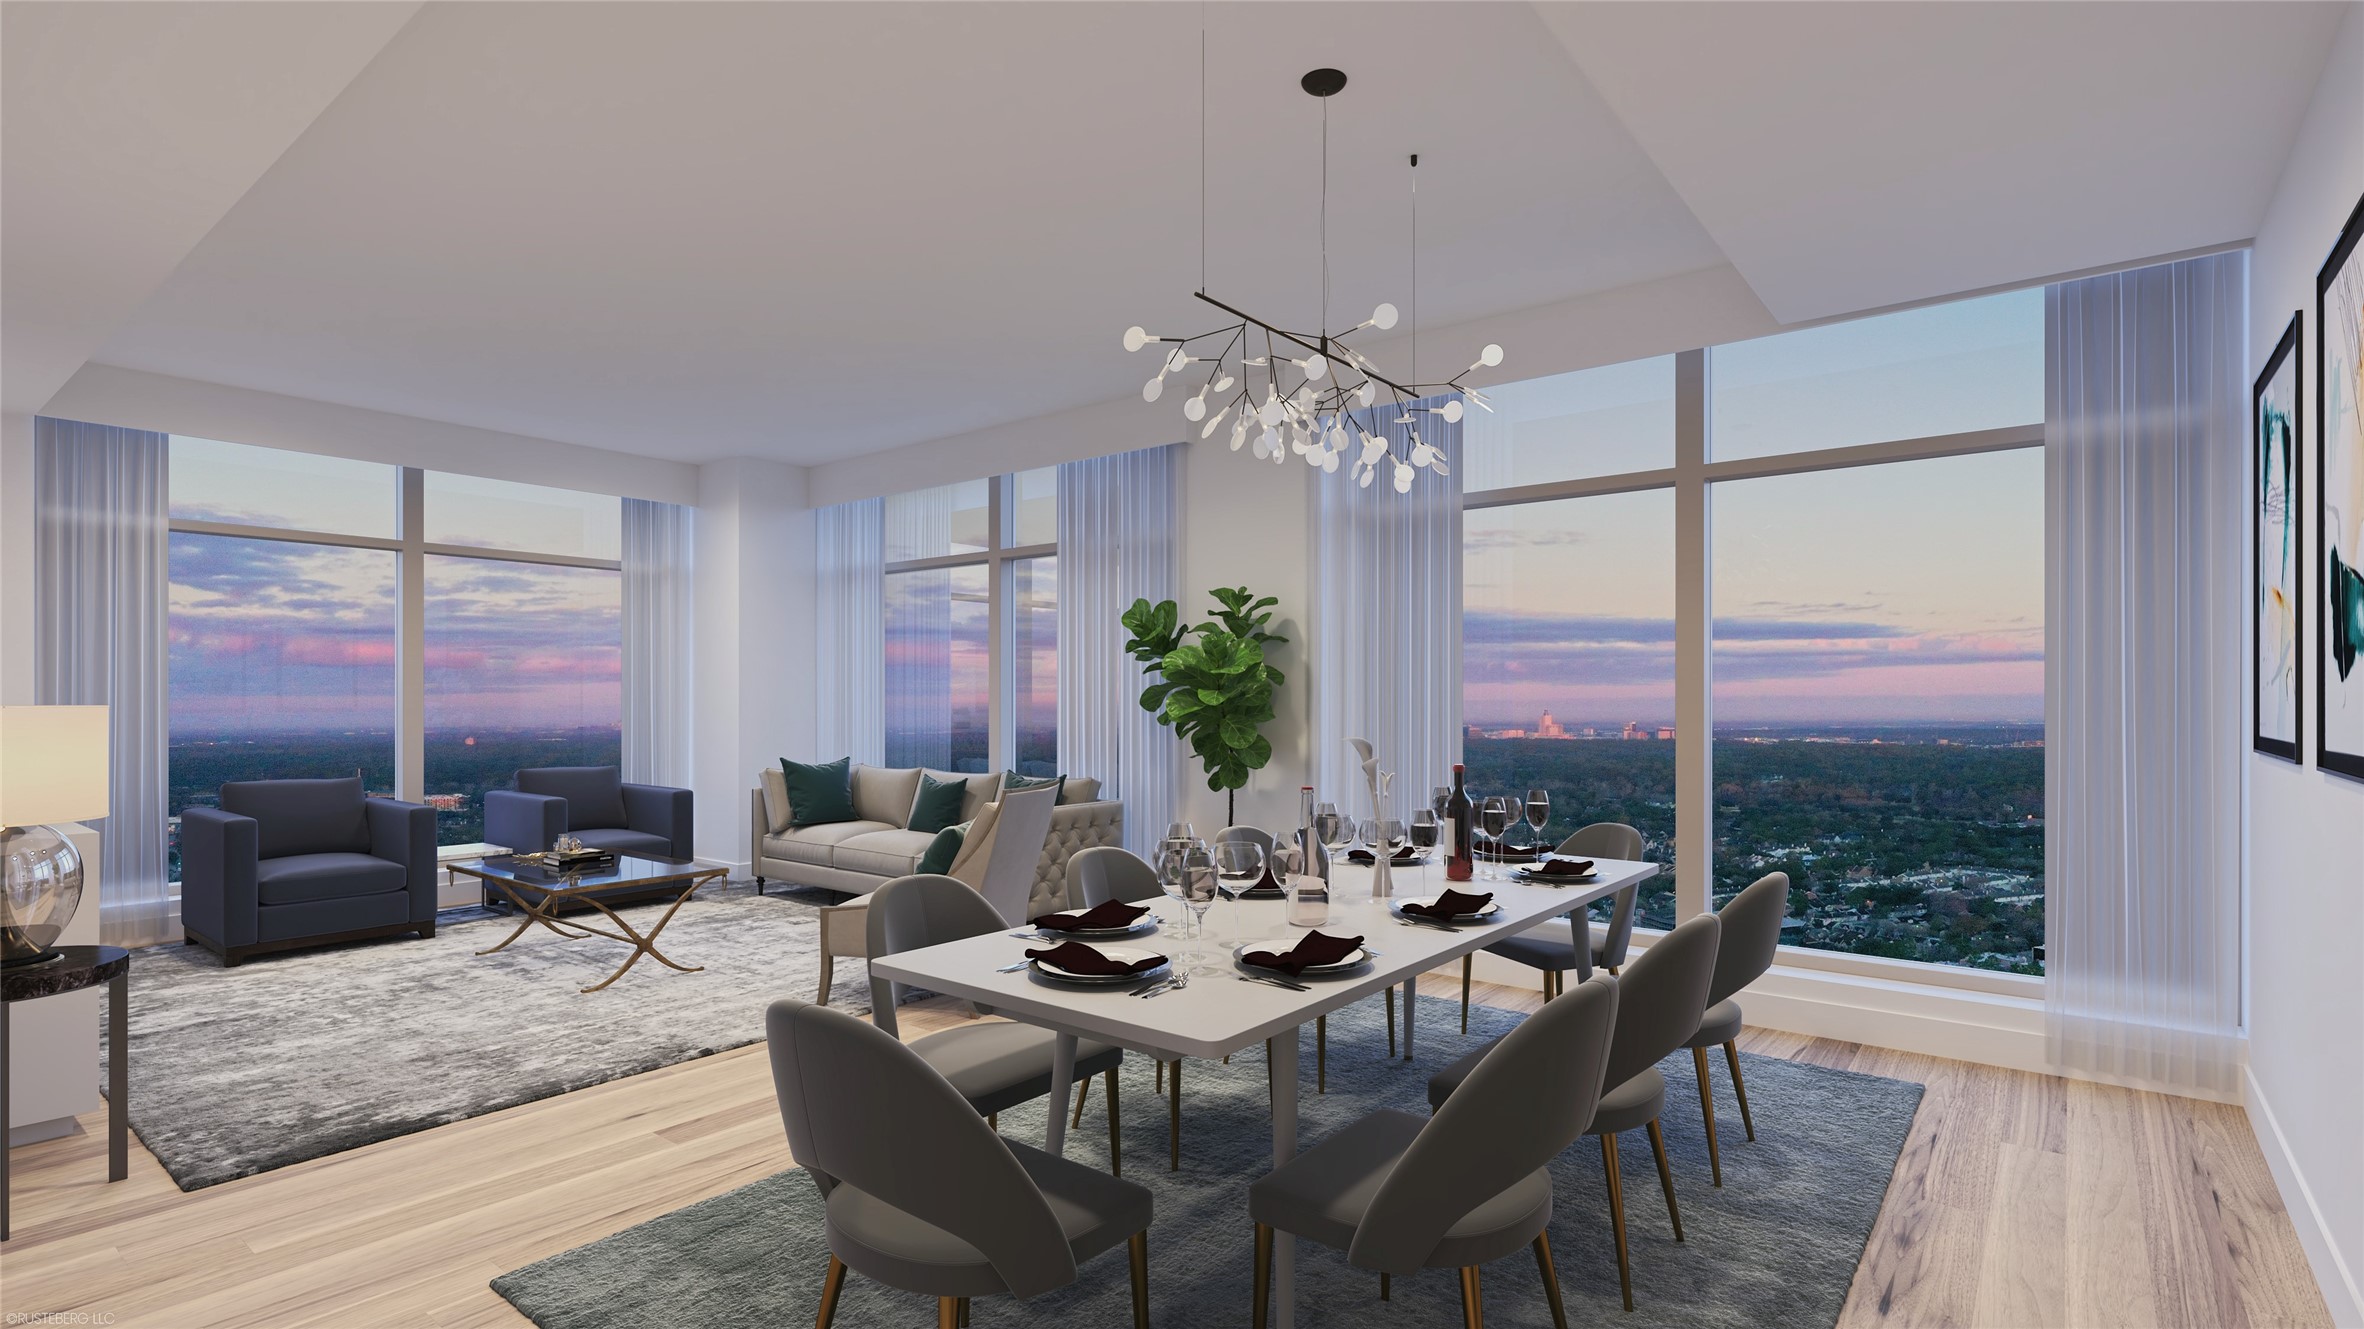 Dining: Featuring floor-to-ceiling panoramic windows, the dining enclave offers dinner with a view. Sweeping vistas framed by recessed ceilings create an atmosphere of premiere elegance.